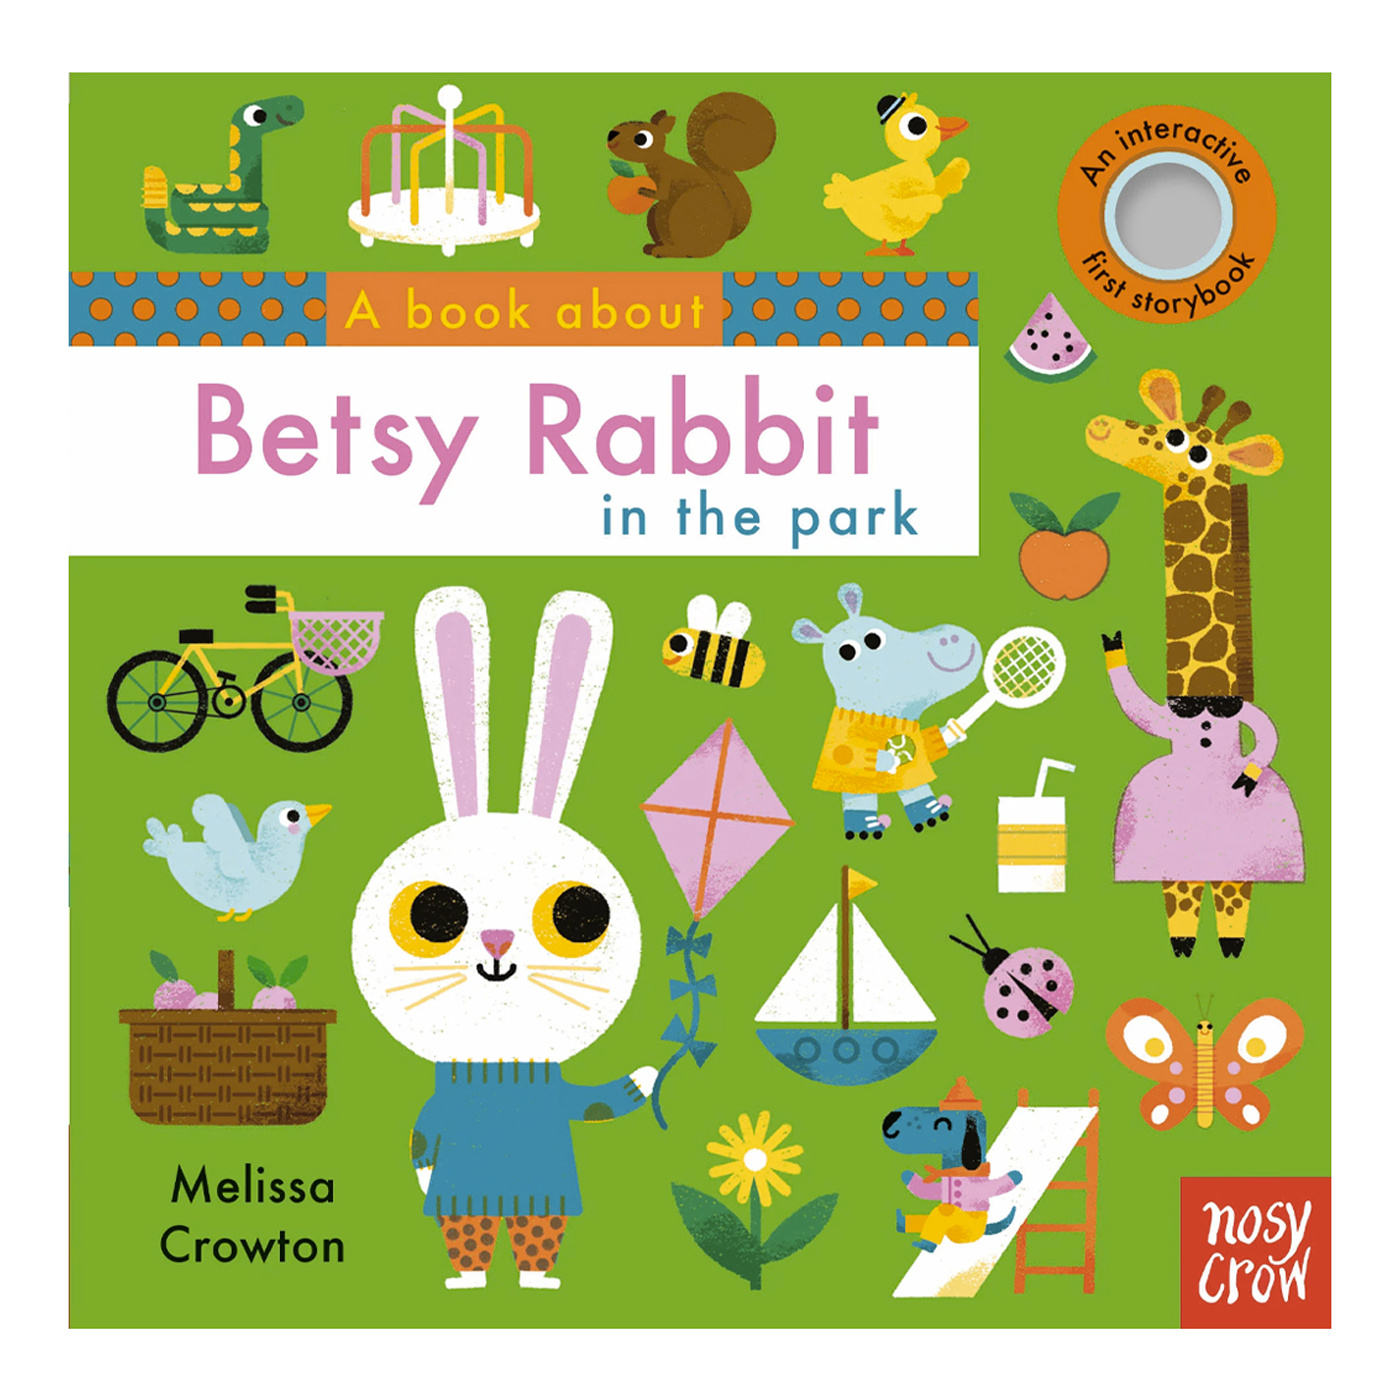 NOSY CROW A book about Betsy Rabbit in the park